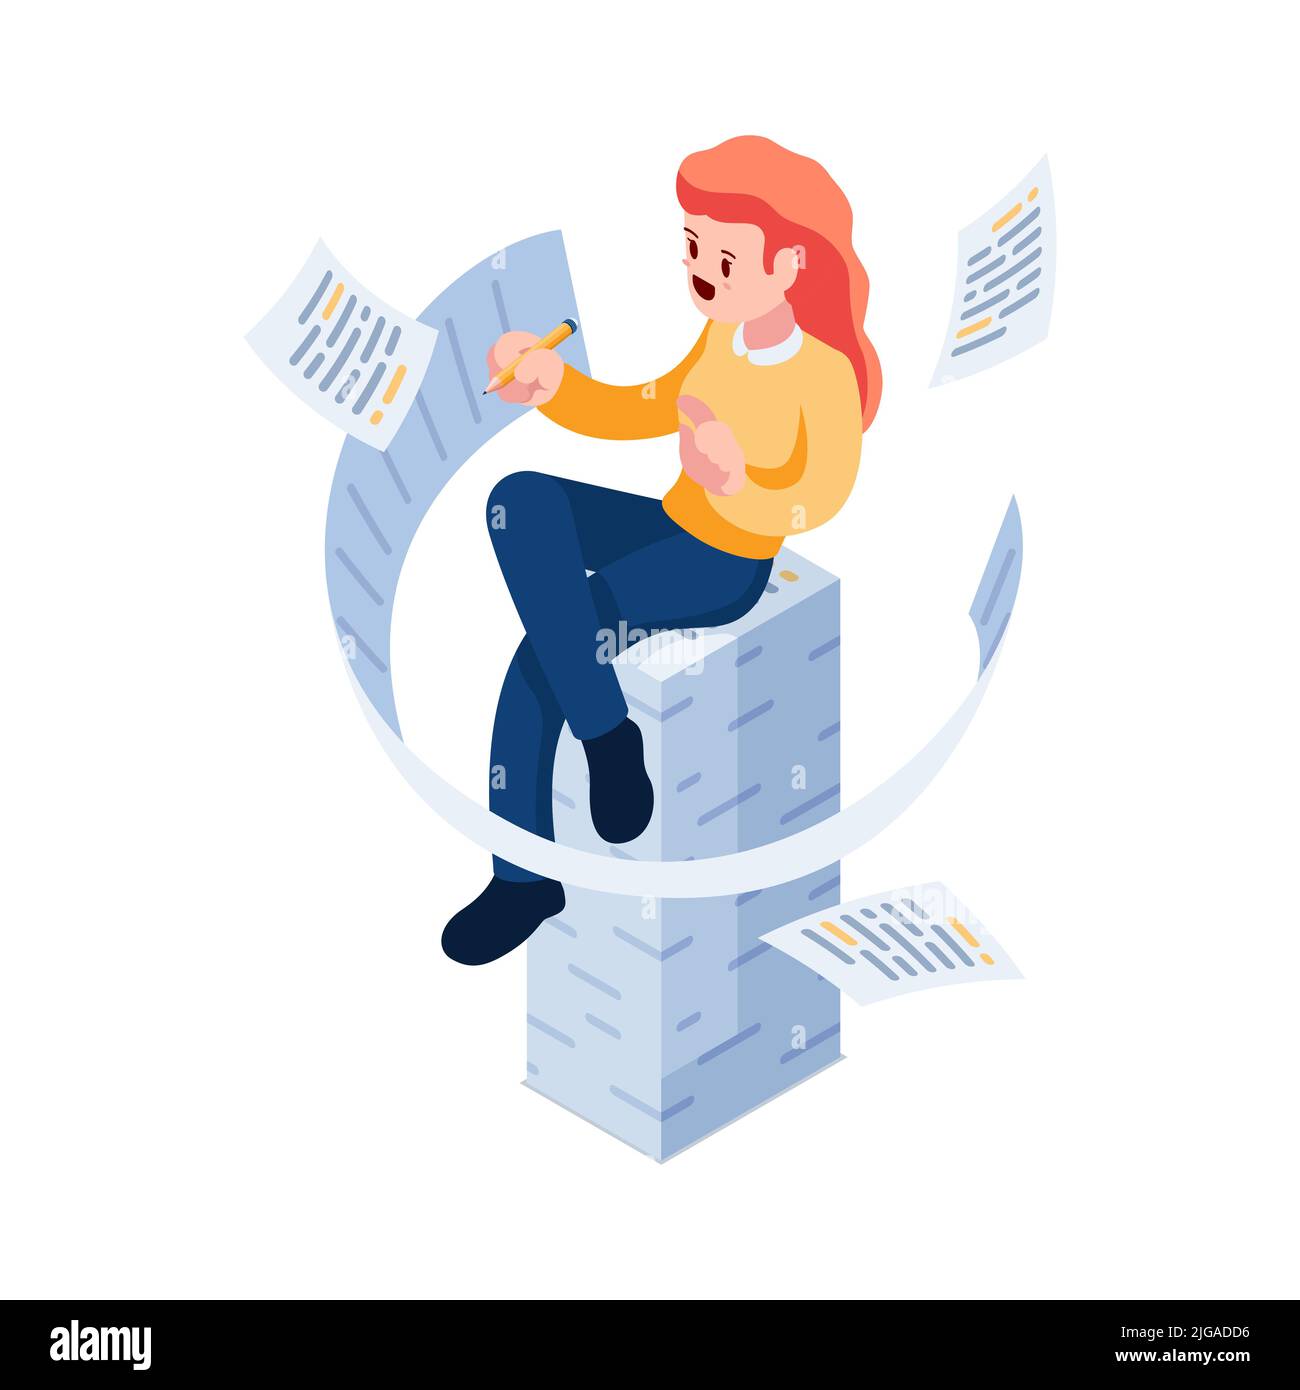 Flat 3d Isometric Woman Writing and Sitting on Document Stack. Writer and Paperwork Concept. Stock Vector